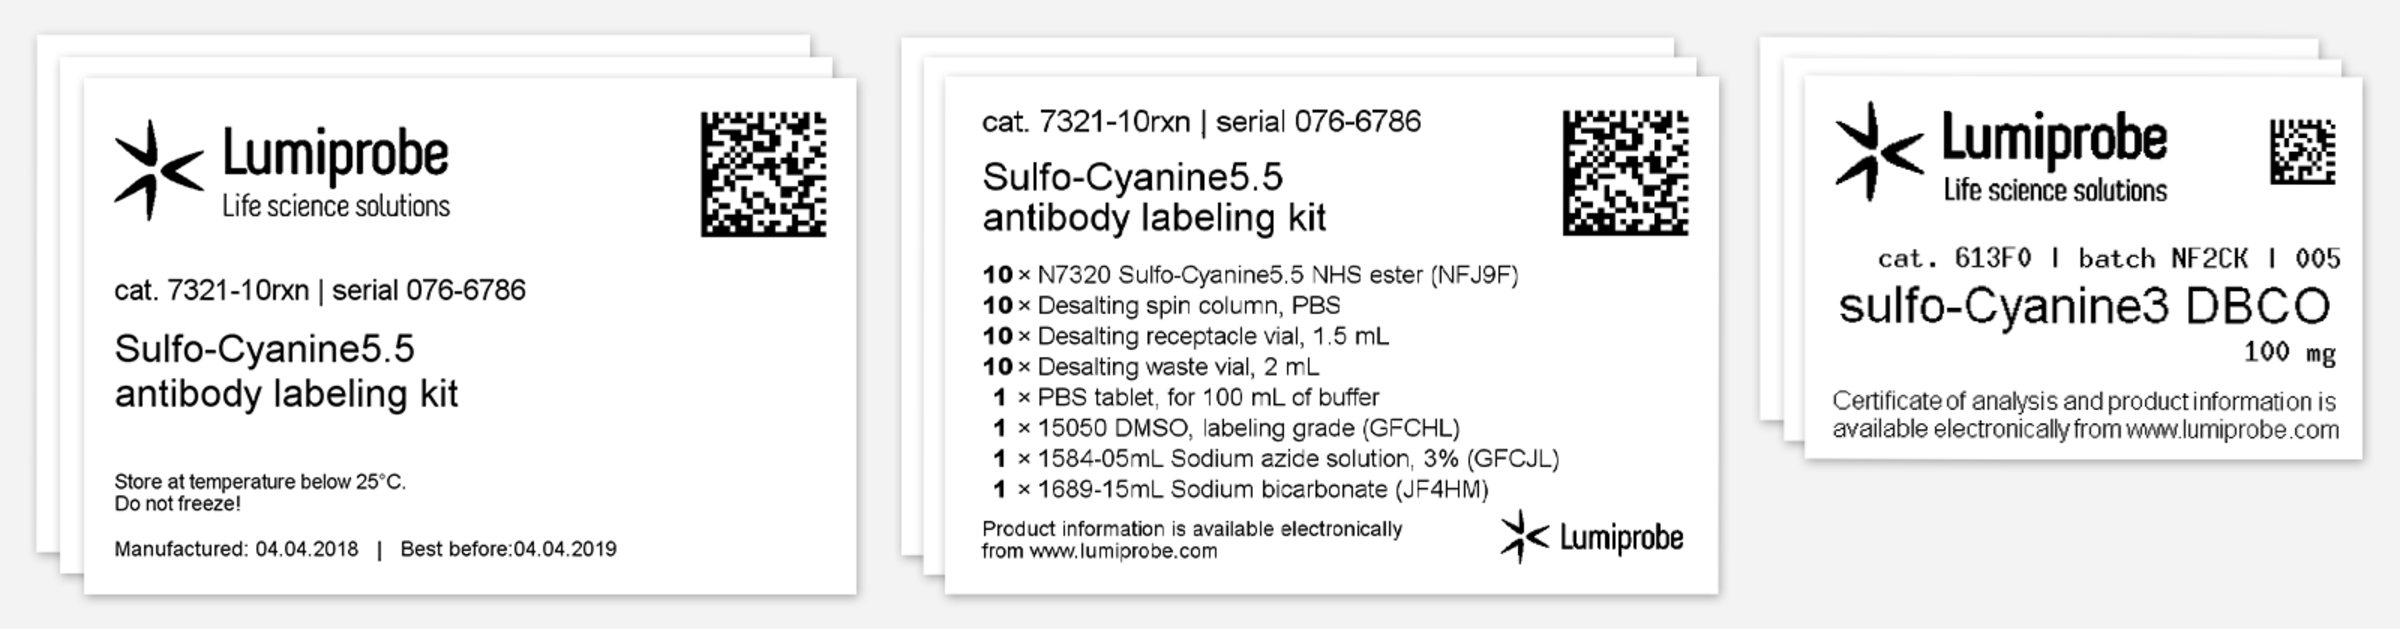 Lumiprobe label with batch number